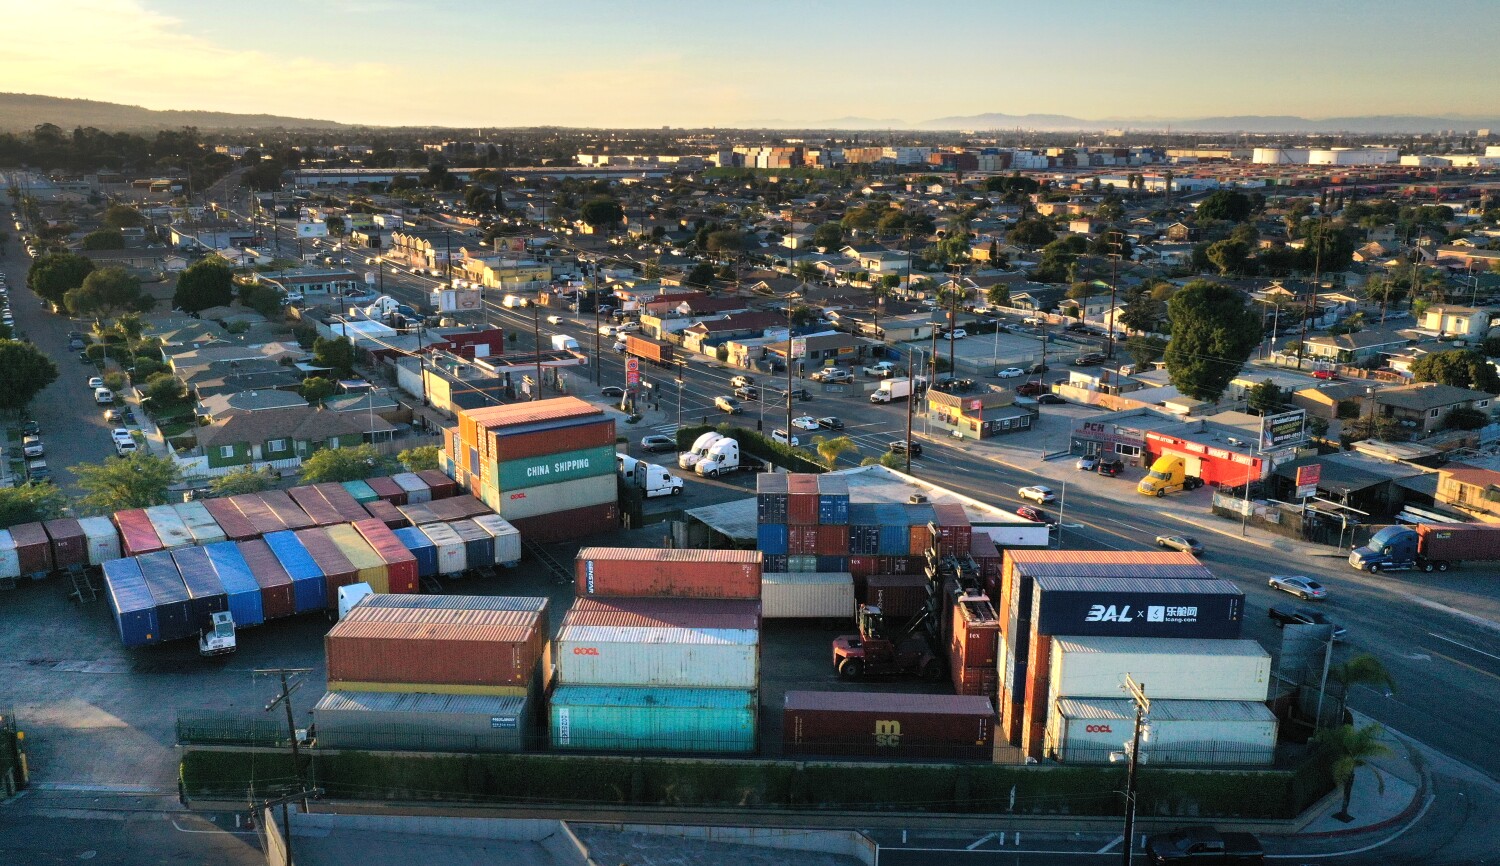 As containers stack up in Wilmington, so do the zoning complaints